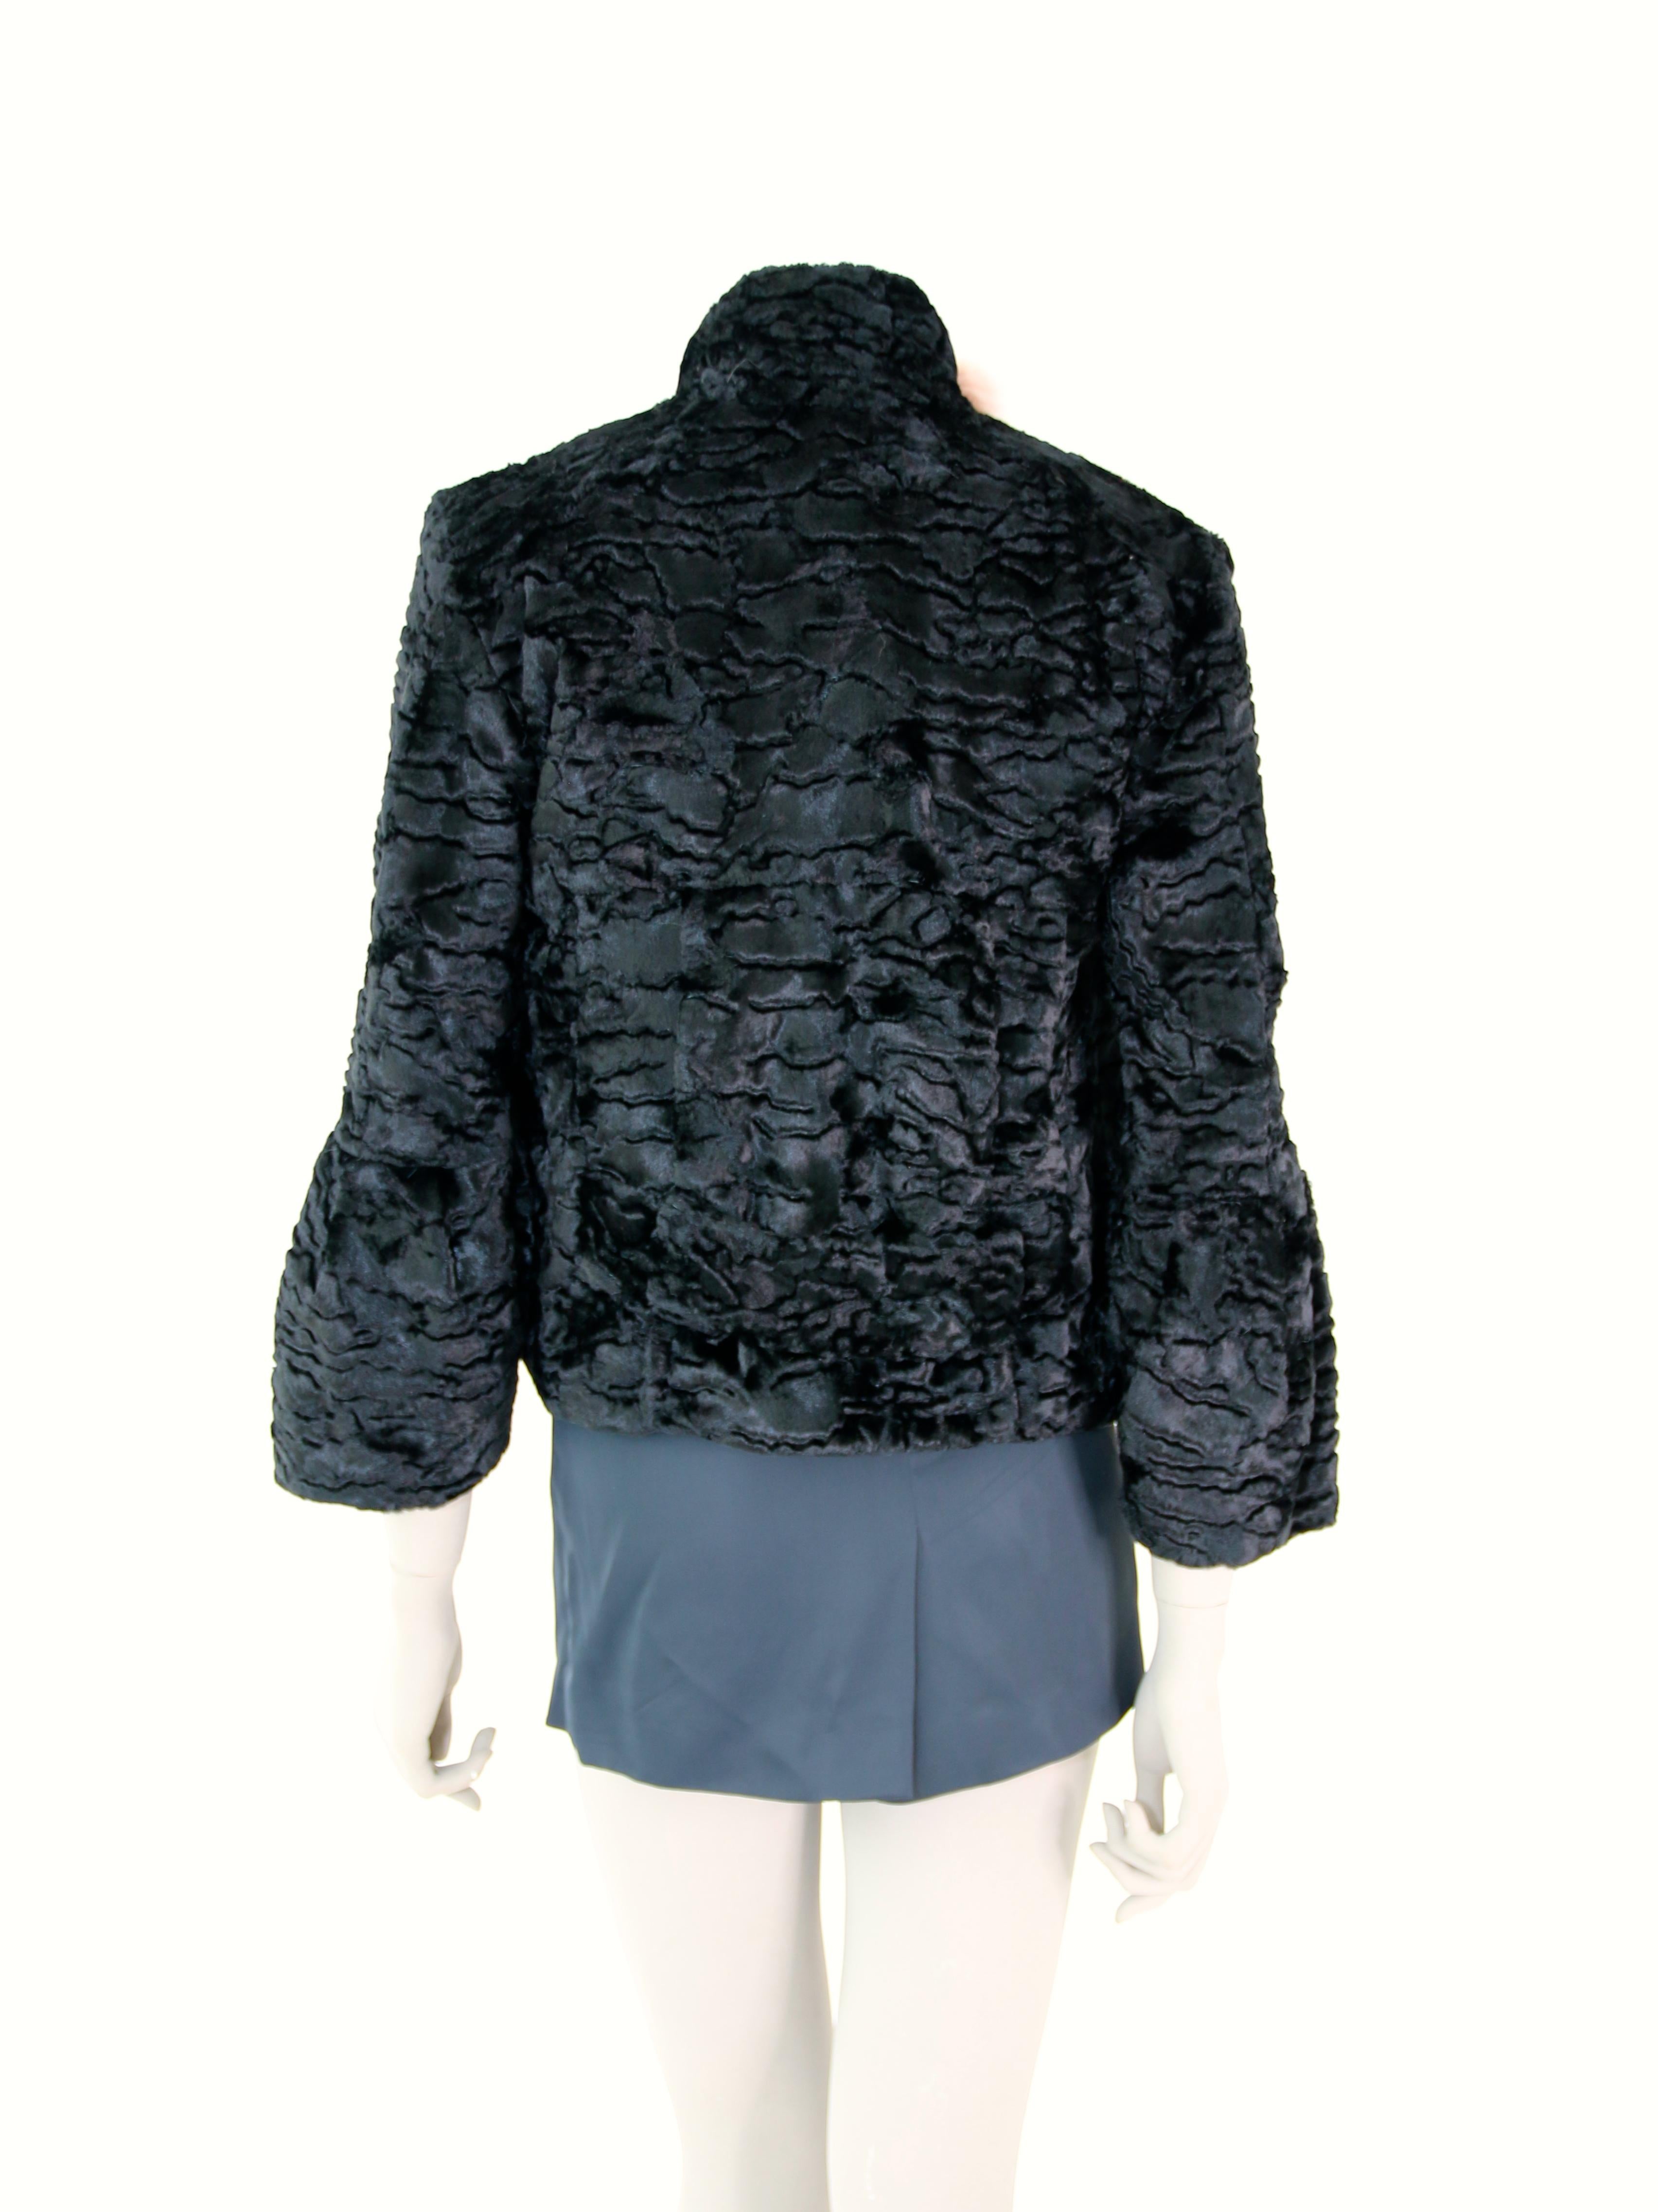 Pelush Black Faux Fur Astrakhan Jacket W/ Botanical Flower Embroidery - Small For Sale 1